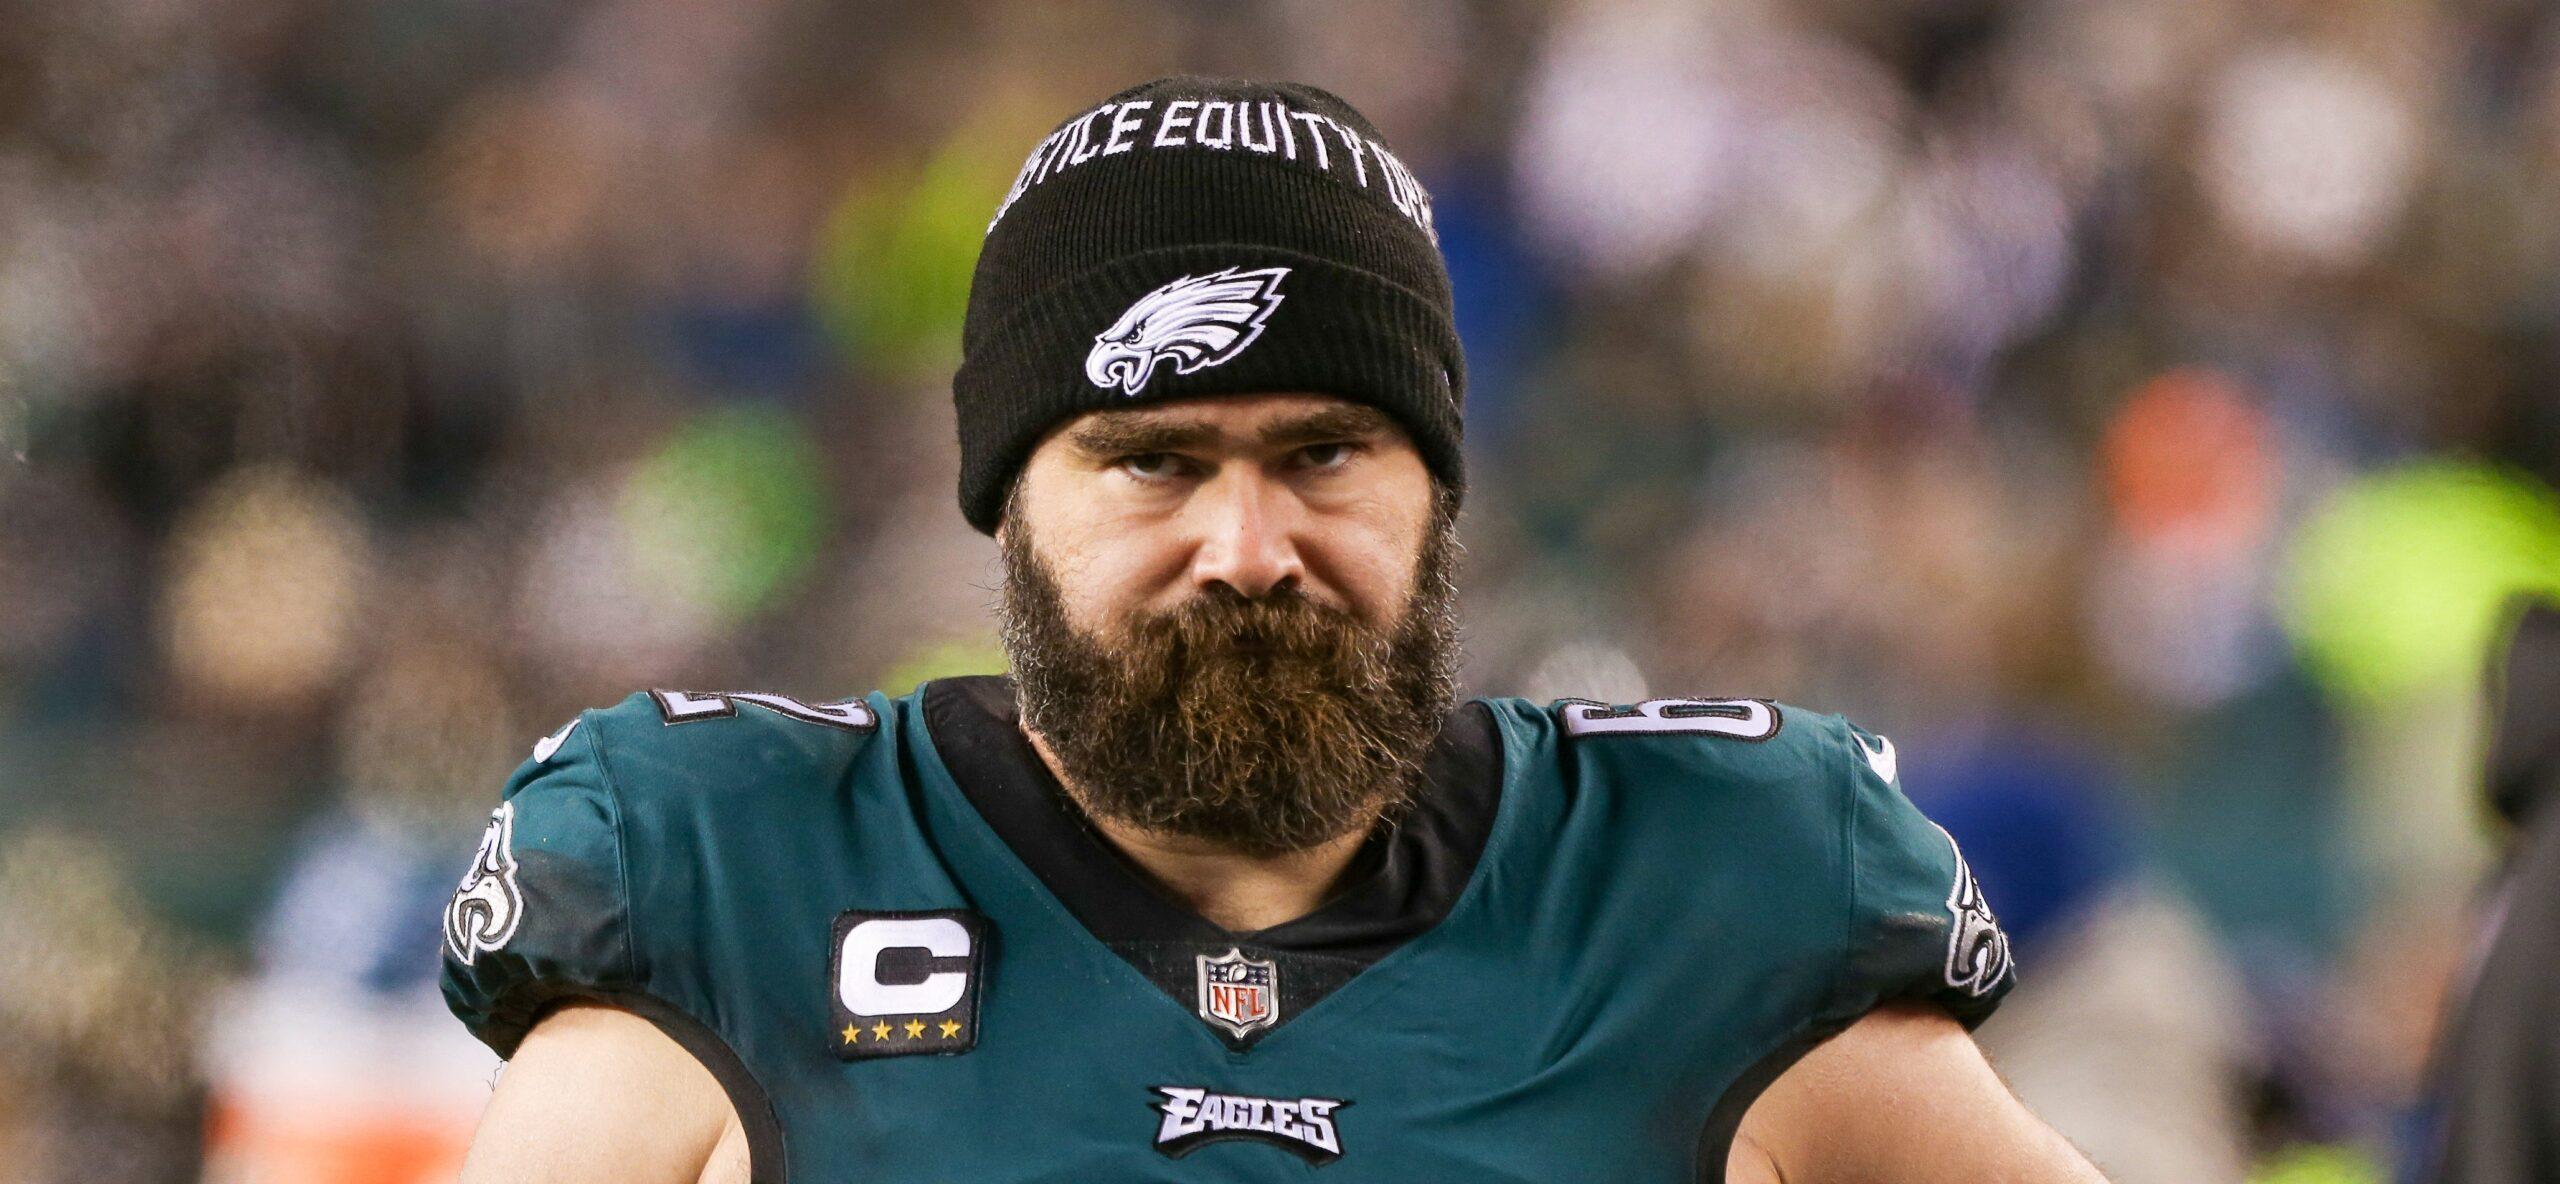 Jason Kelce (62) on the sidelines during the game against the Dallas Cowboys on January 8, 2022 at Lincoln Financial Field.